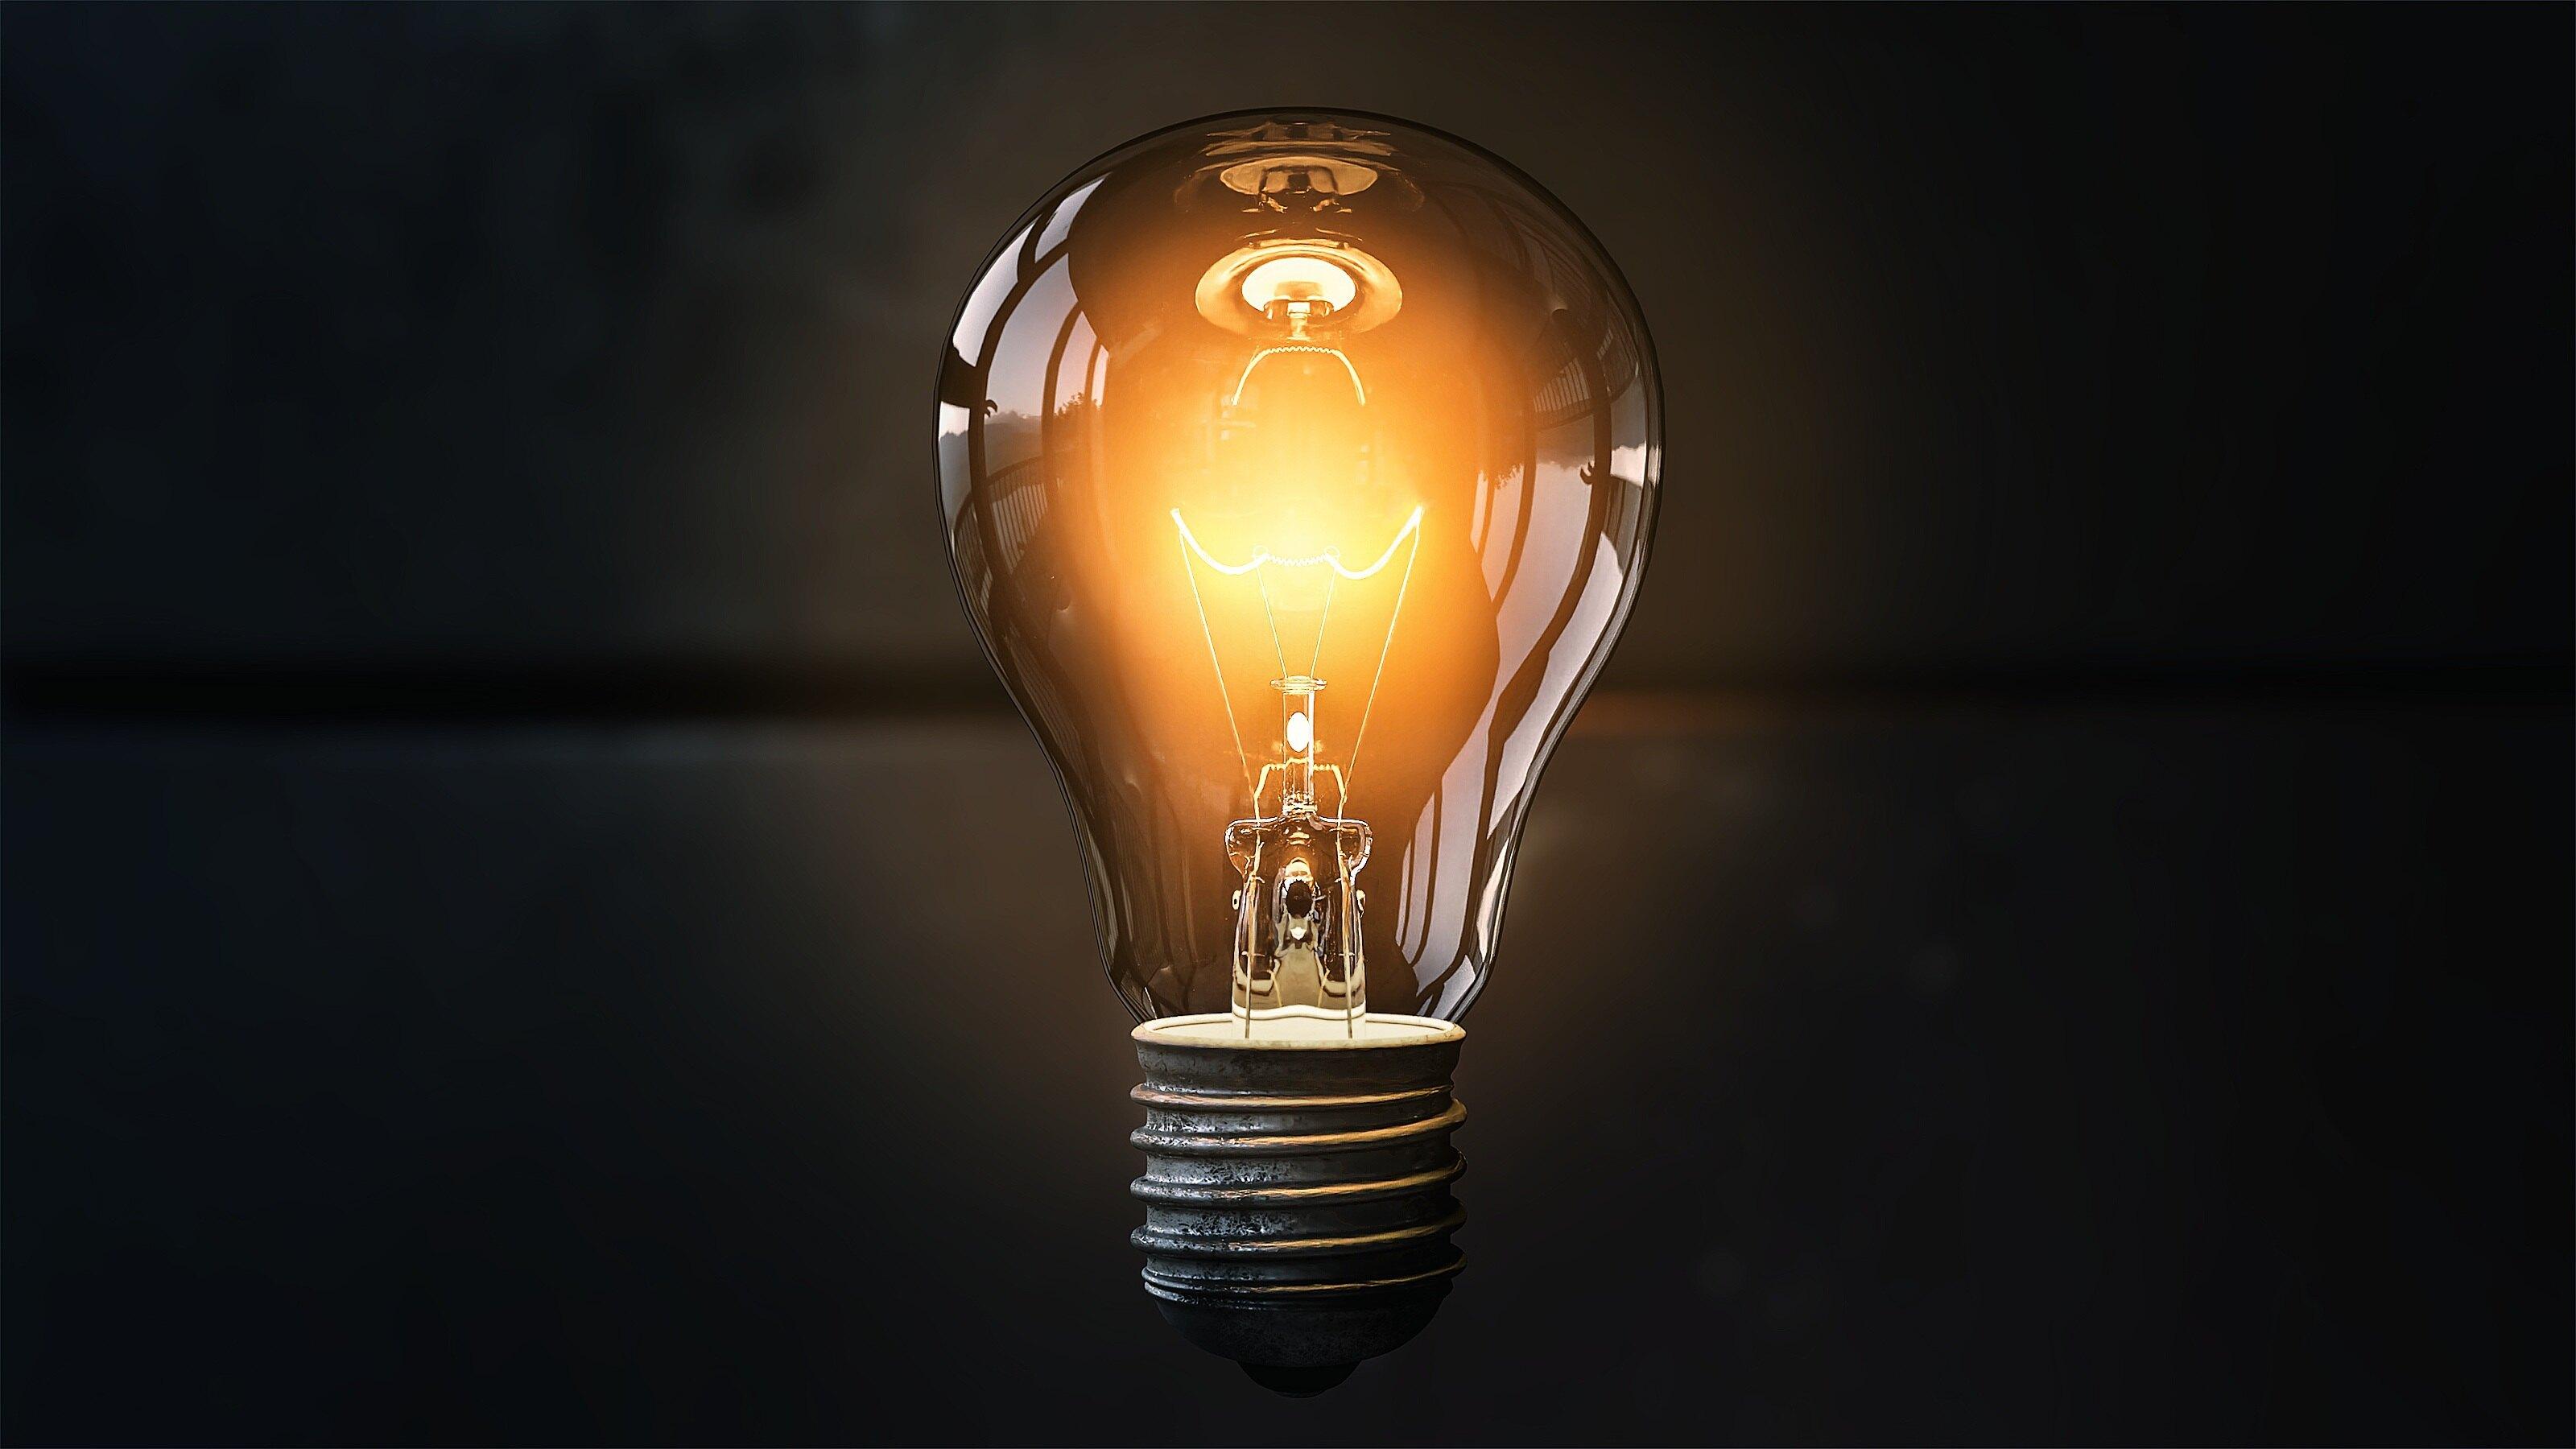 A shiny glass lightbulb that is dimly lit with an orange flow surrounding it that is vintage in front of a fully black background.